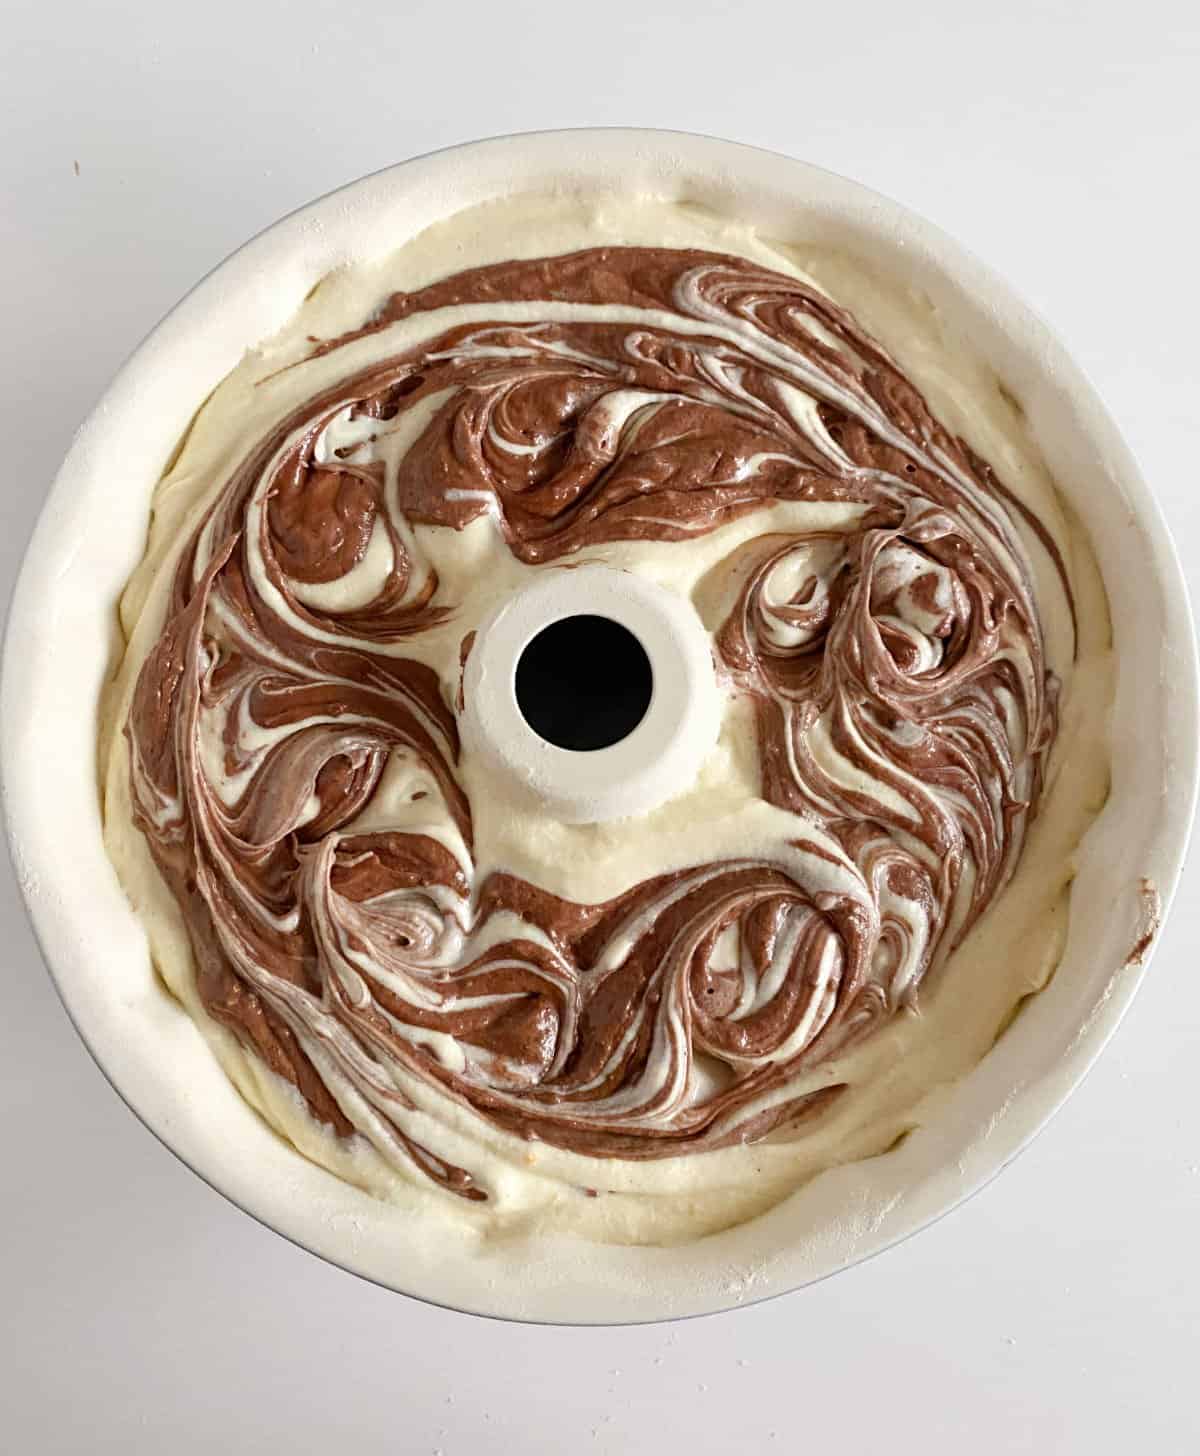 Top view of white and brown marbled unbaked bundt cake in white pan on white surface.